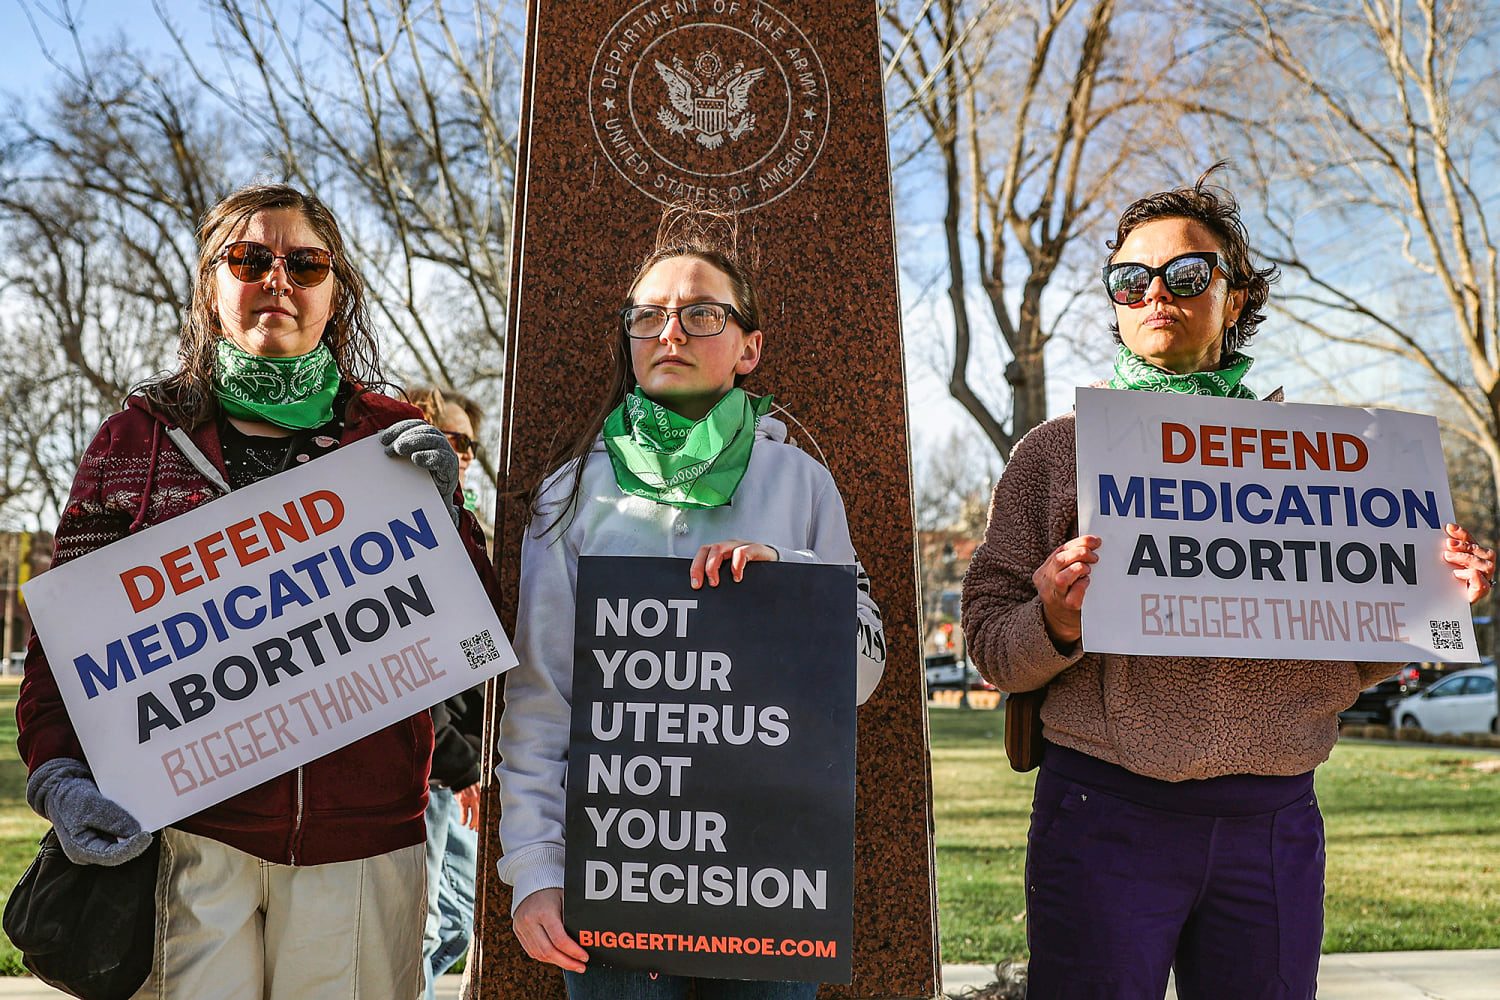 A 'dangerous precedent': Doctors and patient advocates fear restricted access to abortion pill